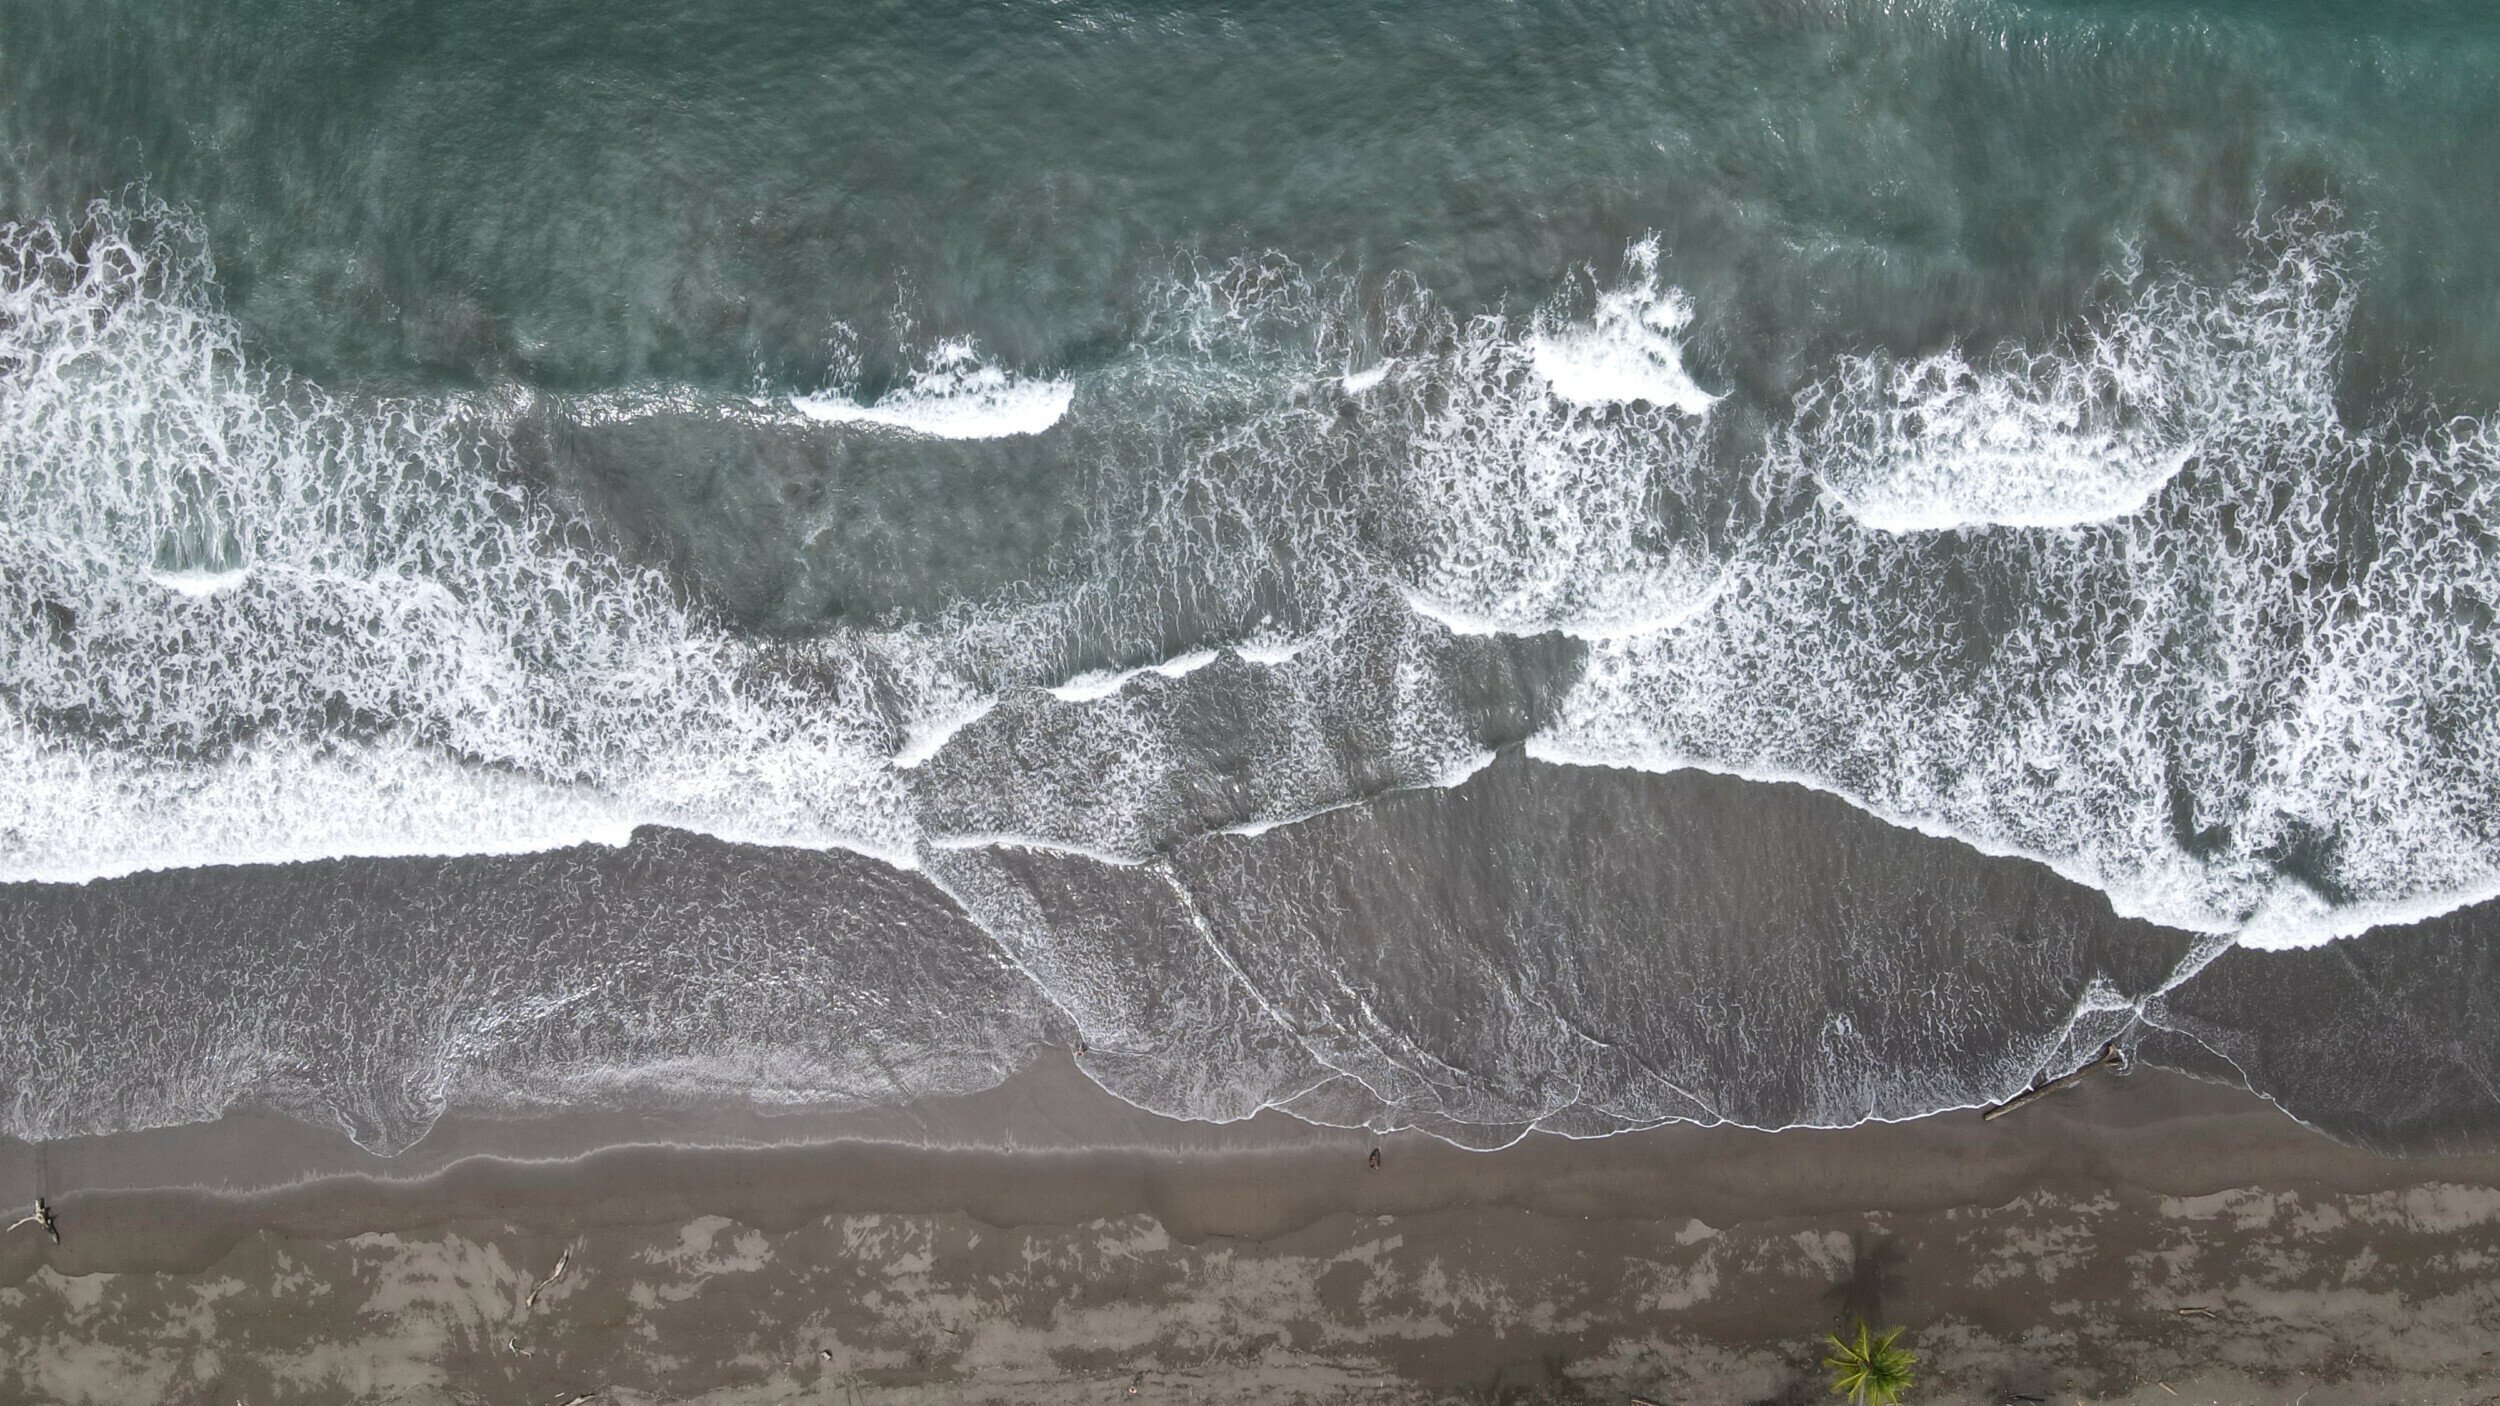 Aerial photo capturing the tranquil waves and deserted sands of Palo Seco Beach in Costa Rica, taken by DJI Mavic Air 2 drone